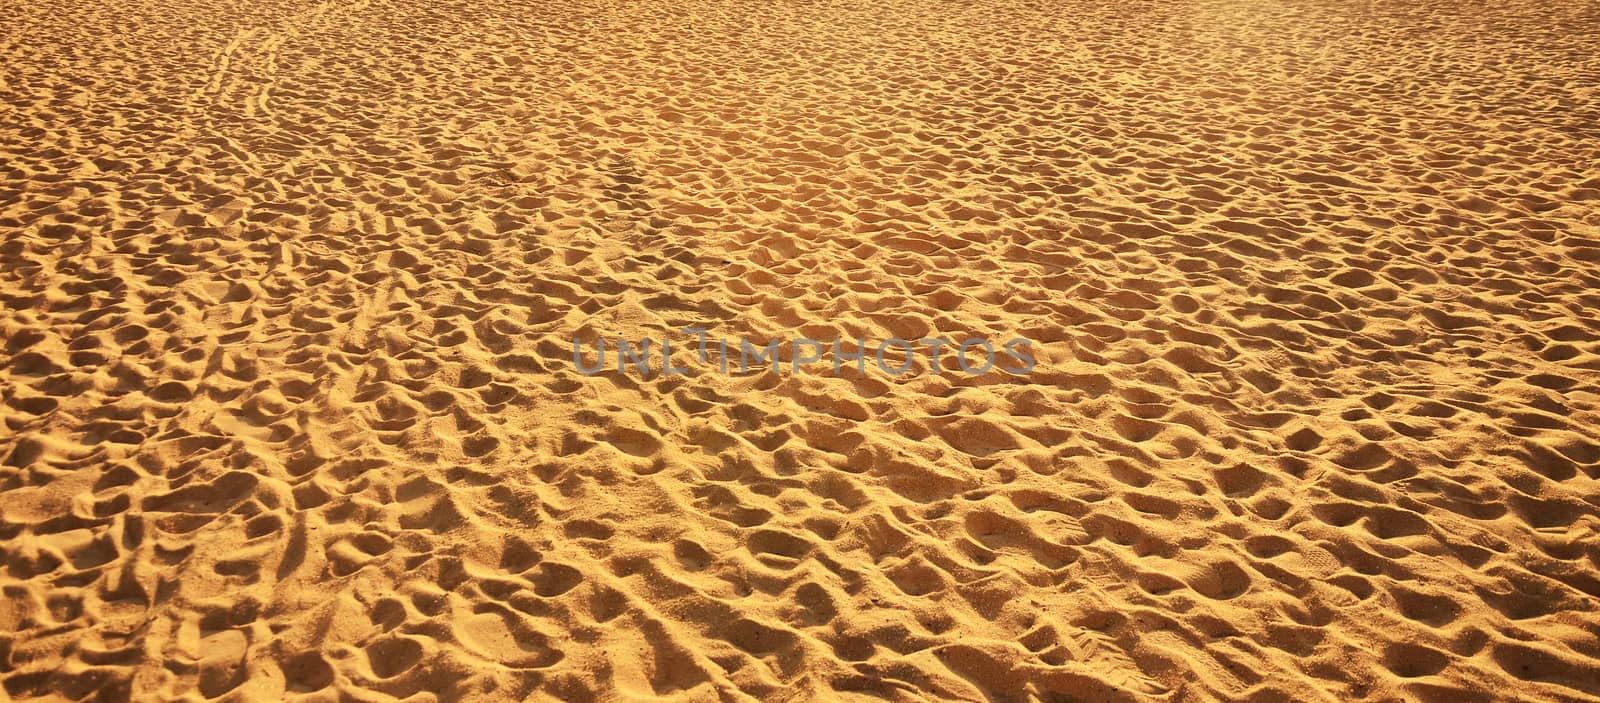 Sand backgrounds and texture with footprints.